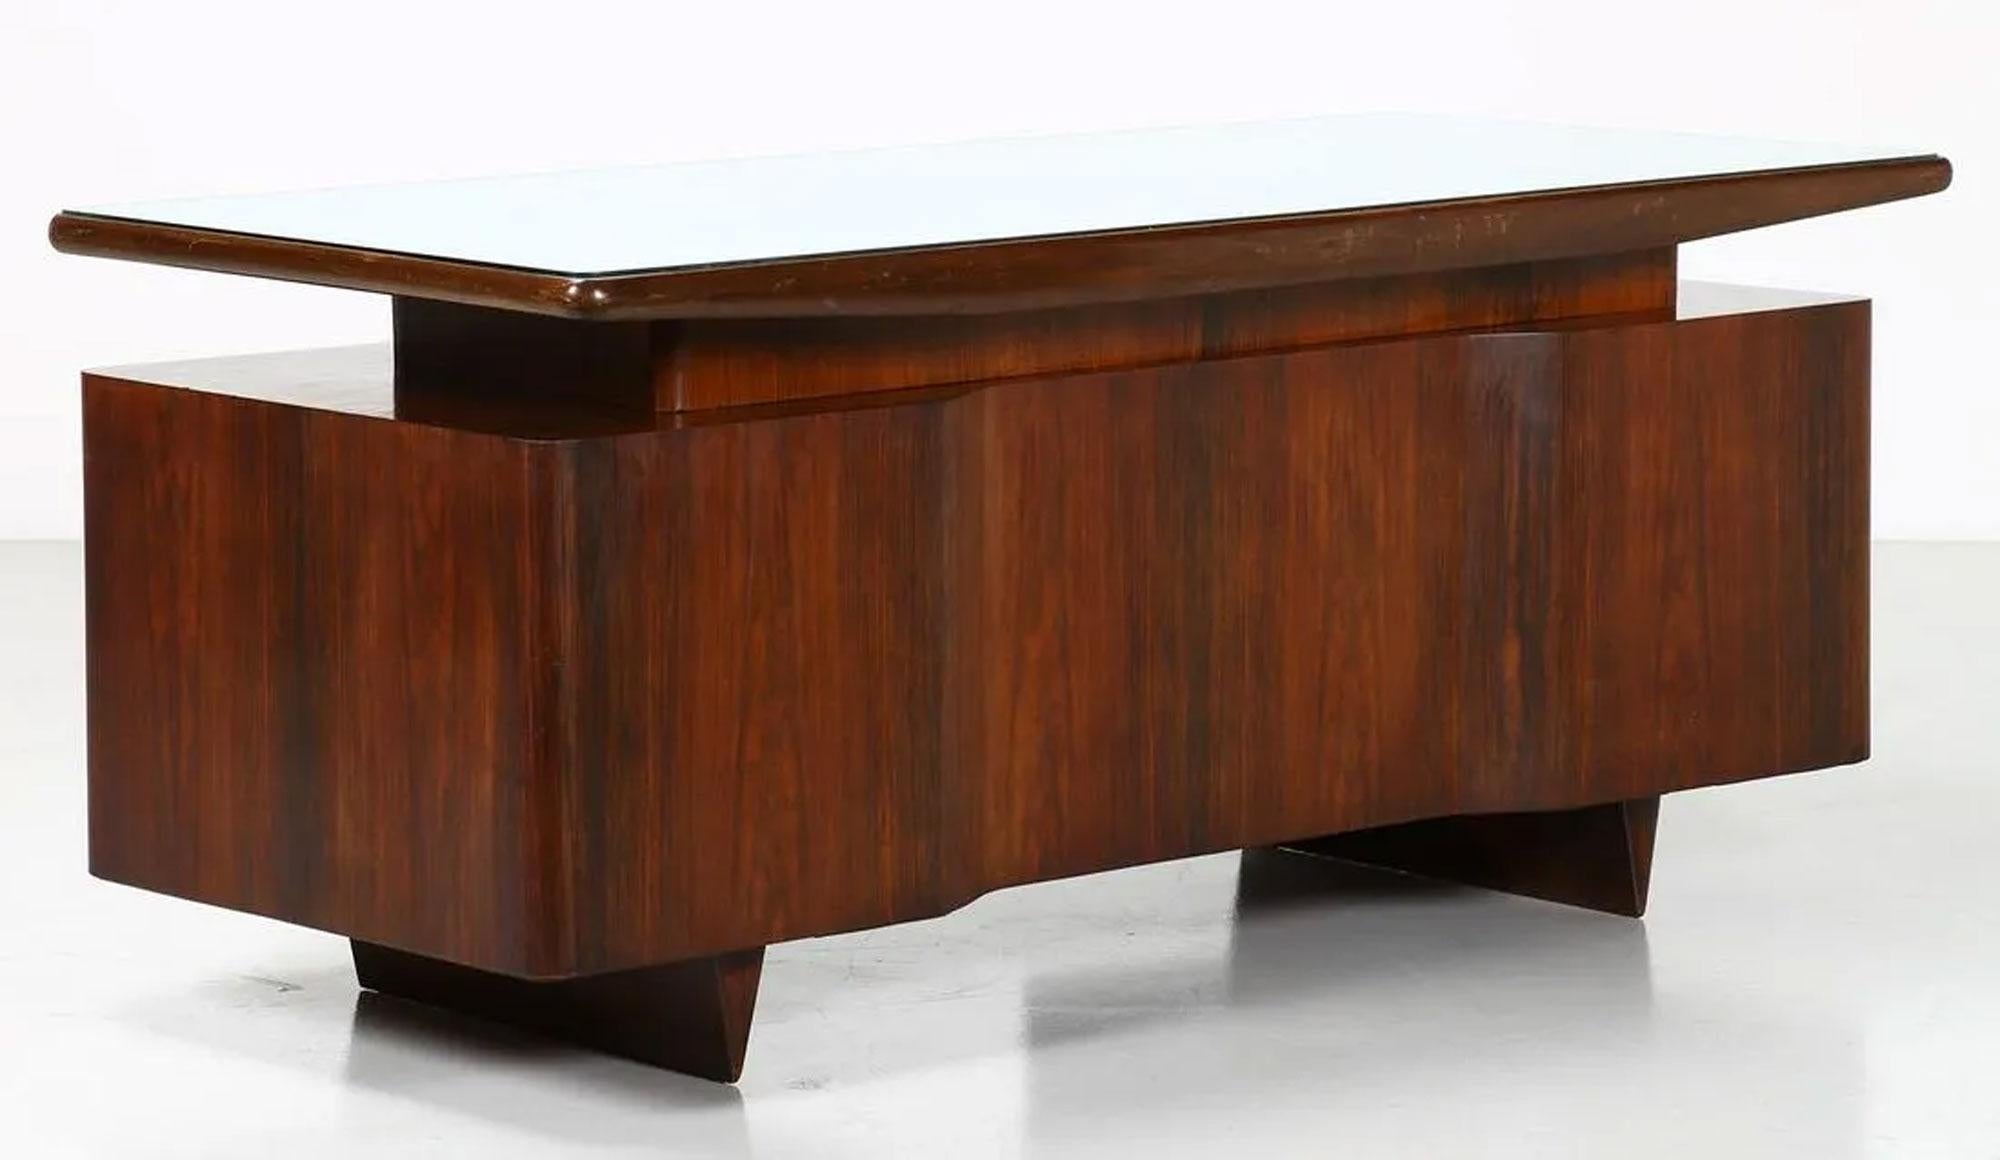 GIO PONTI ATTRIBUTED 'ROSEWOOD DESK'
c. 1950's
ROSEWOOD, CRYSTAL GLASS
31.5 H x 73 W x 33 D inches.